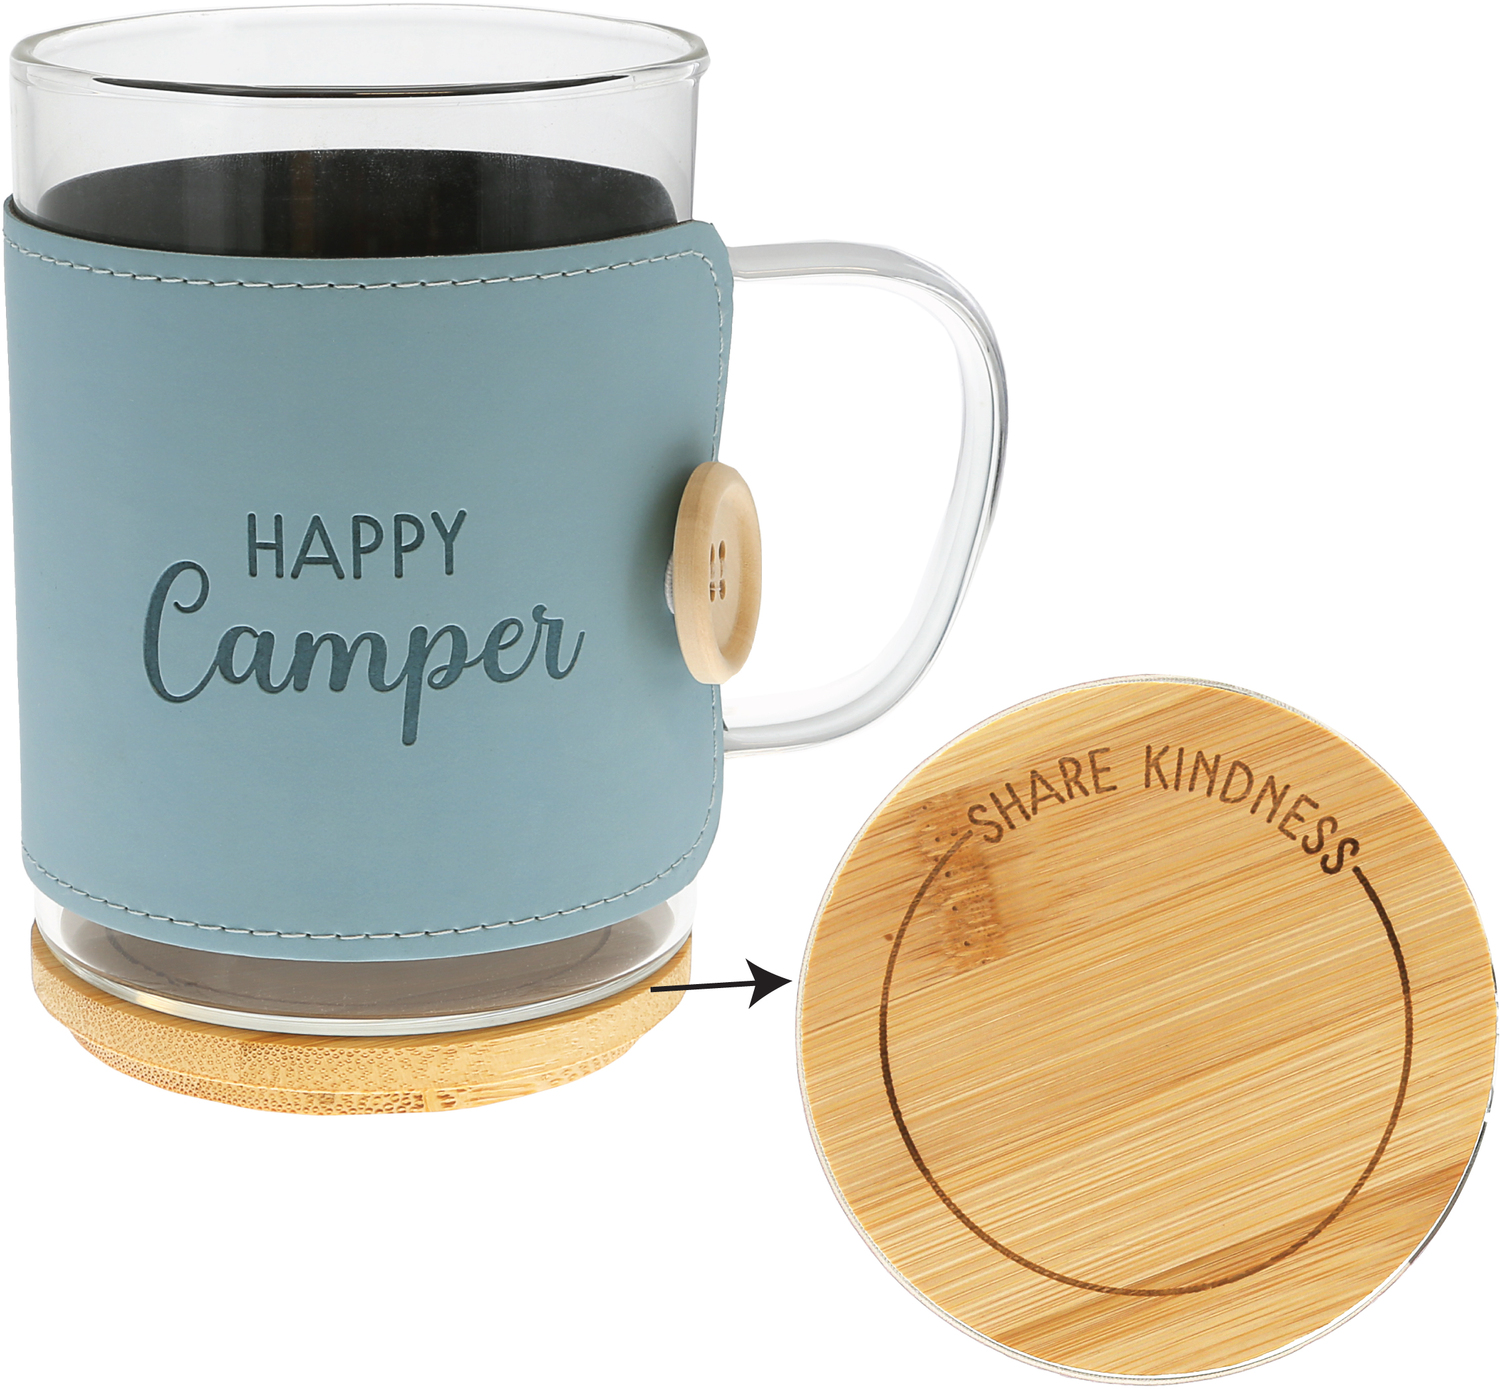 Camper by Wrapped in Kindness - Camper - 16 oz Wrapped Glass Mug with Coaster Lid